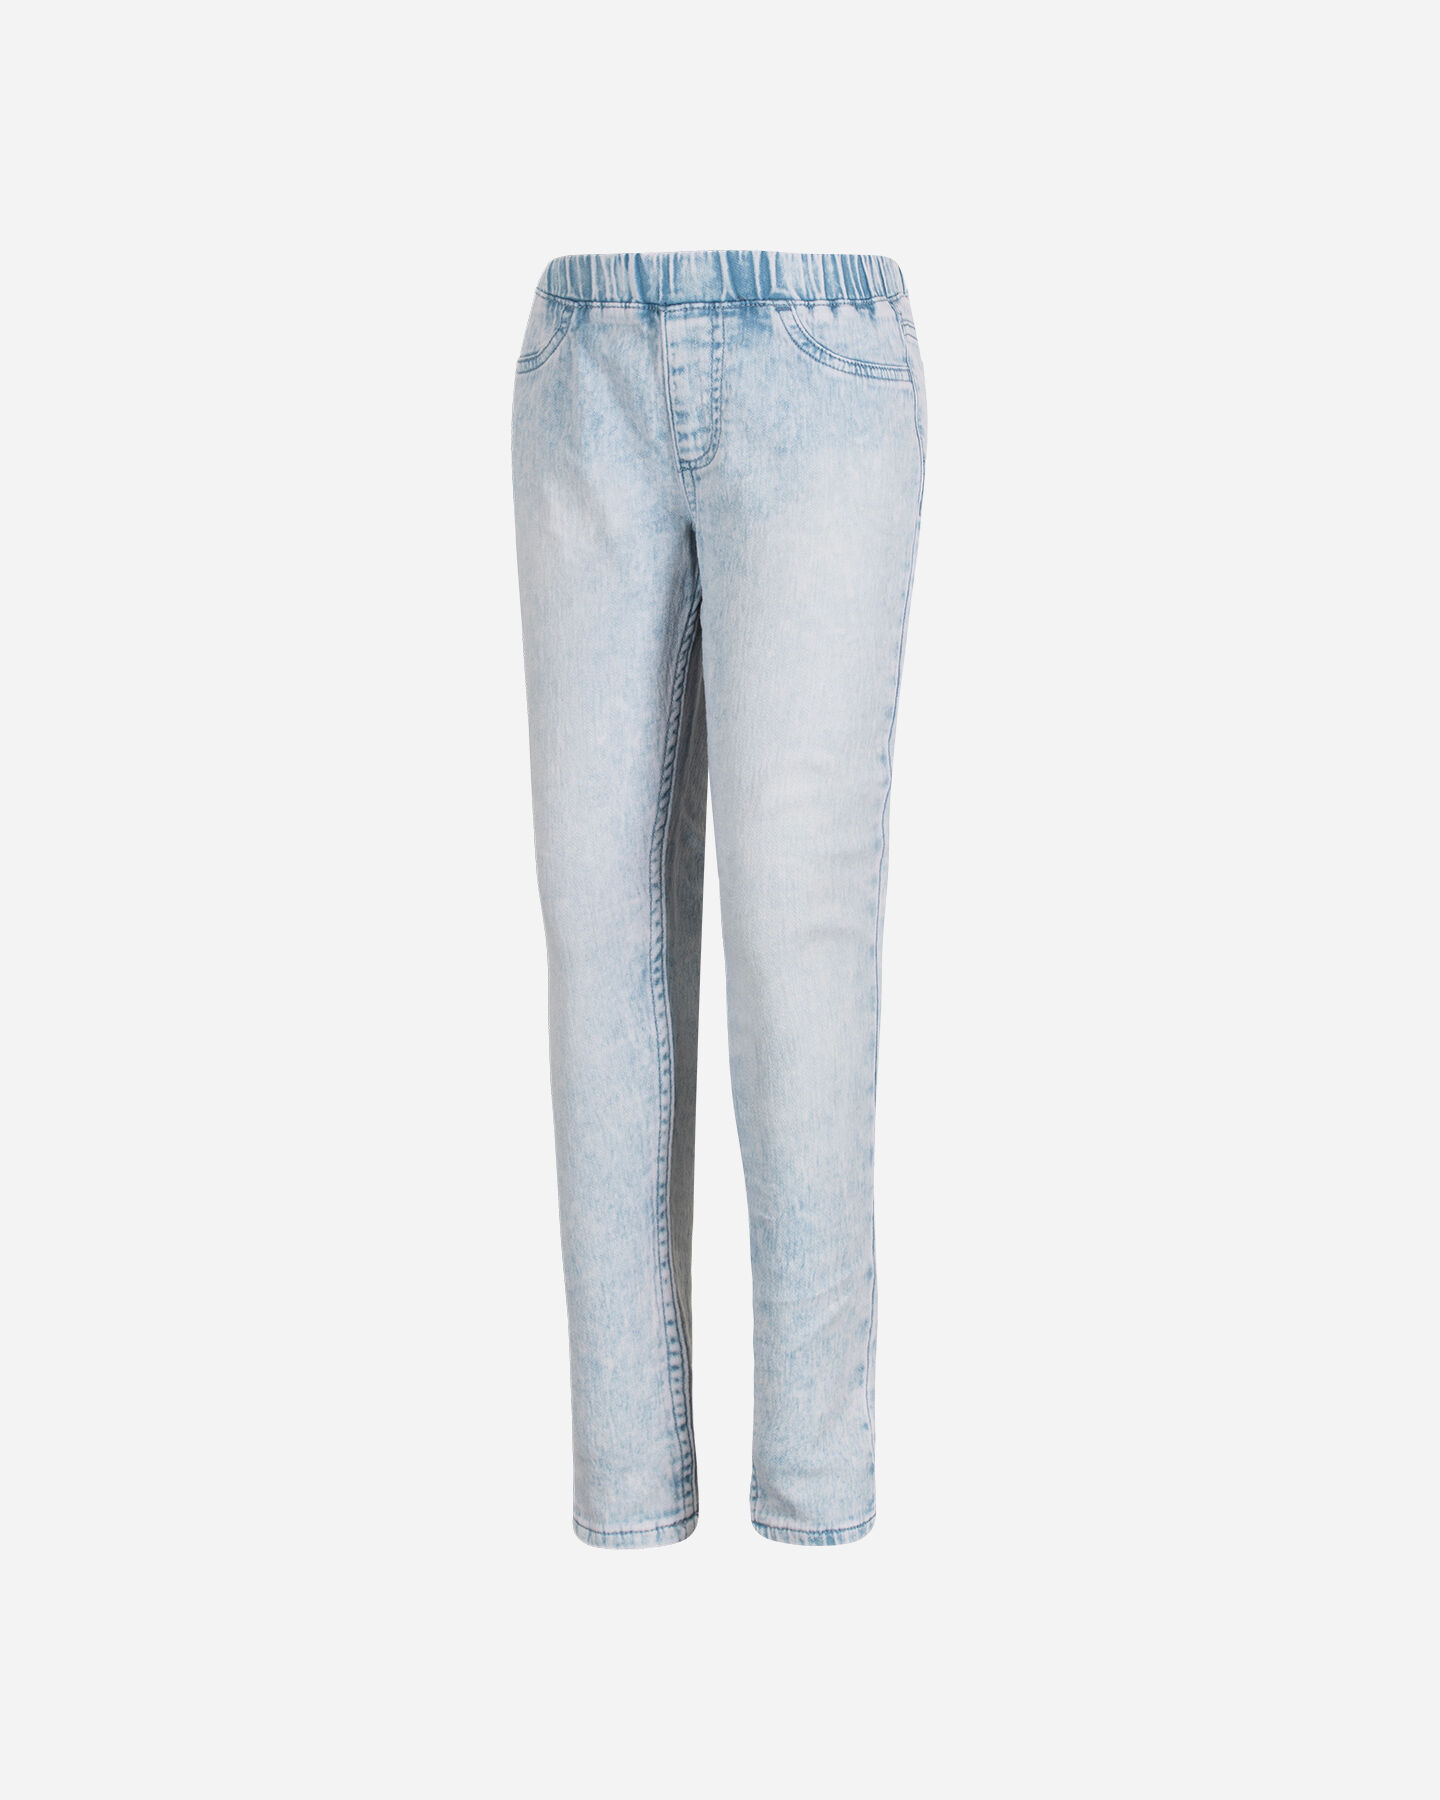  Jeans ADMIRAL LIFESTYLE JR S4119407|LD|4A scatto 0